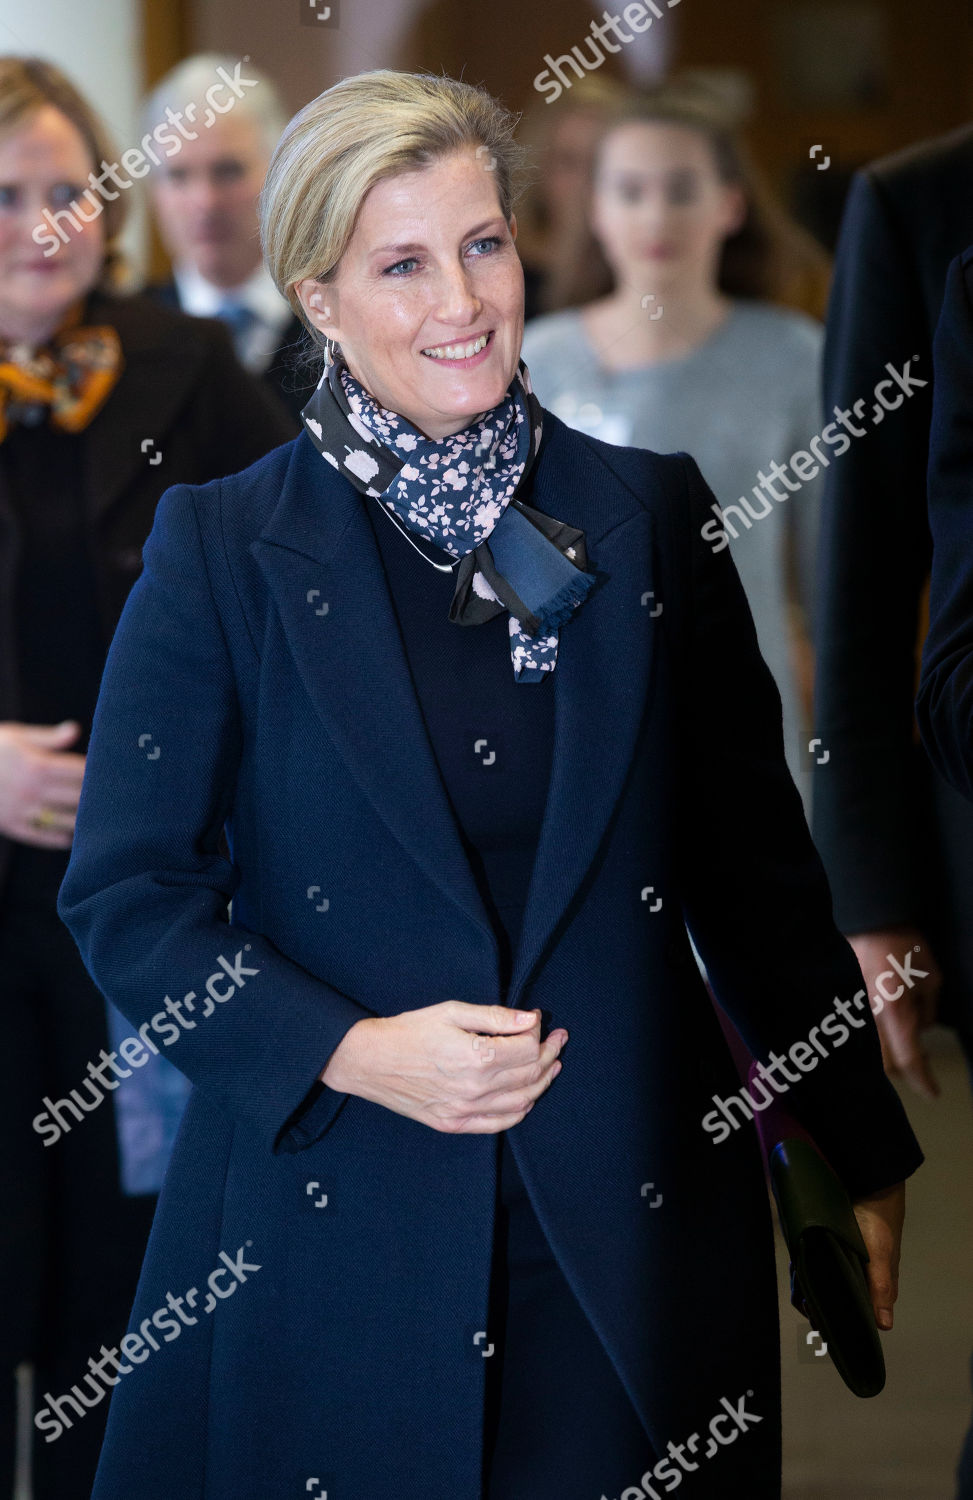 sophie-countess-of-wessex-visit-to-cornwall-uk-shutterstock-editorial-10013548af.jpg